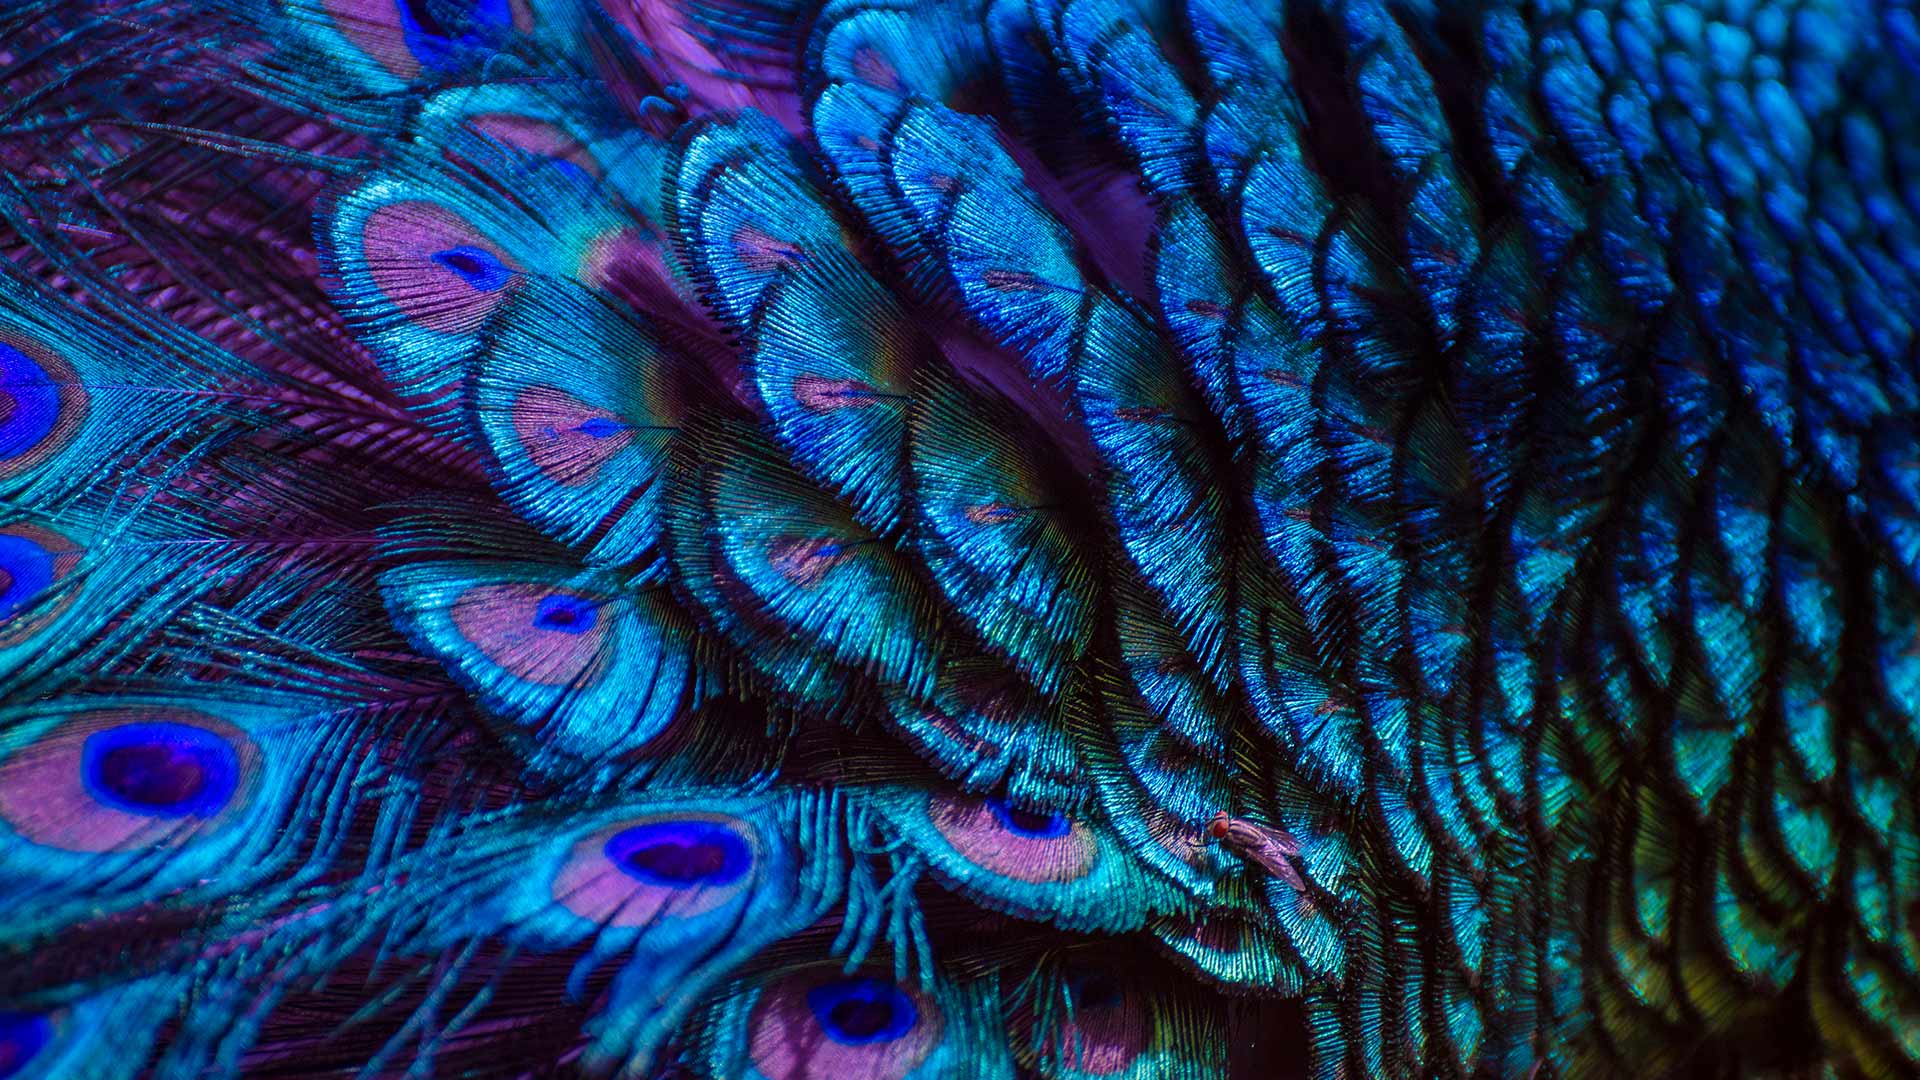 colorful peacock wallpapers